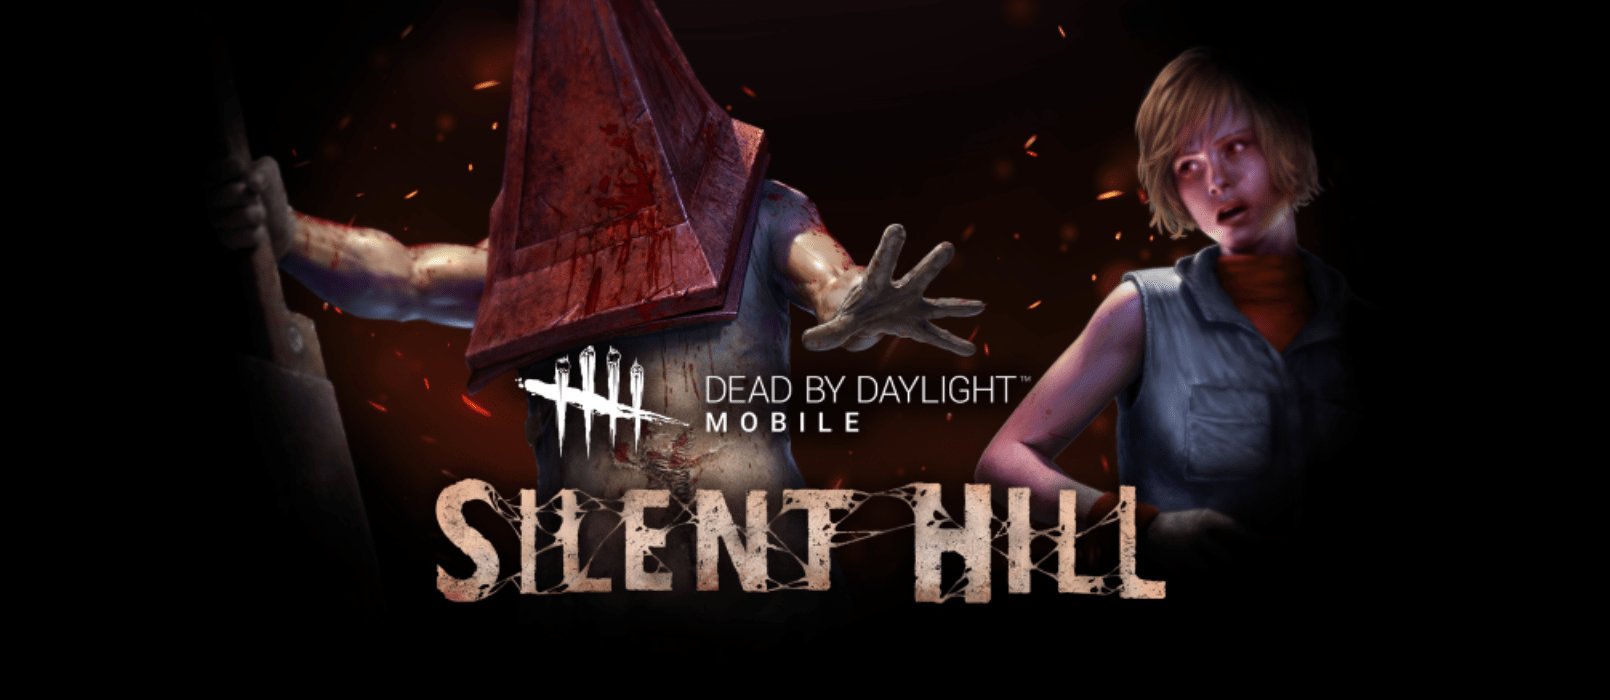 Dead by Daylight Mobile Silent Hill October 26 2020